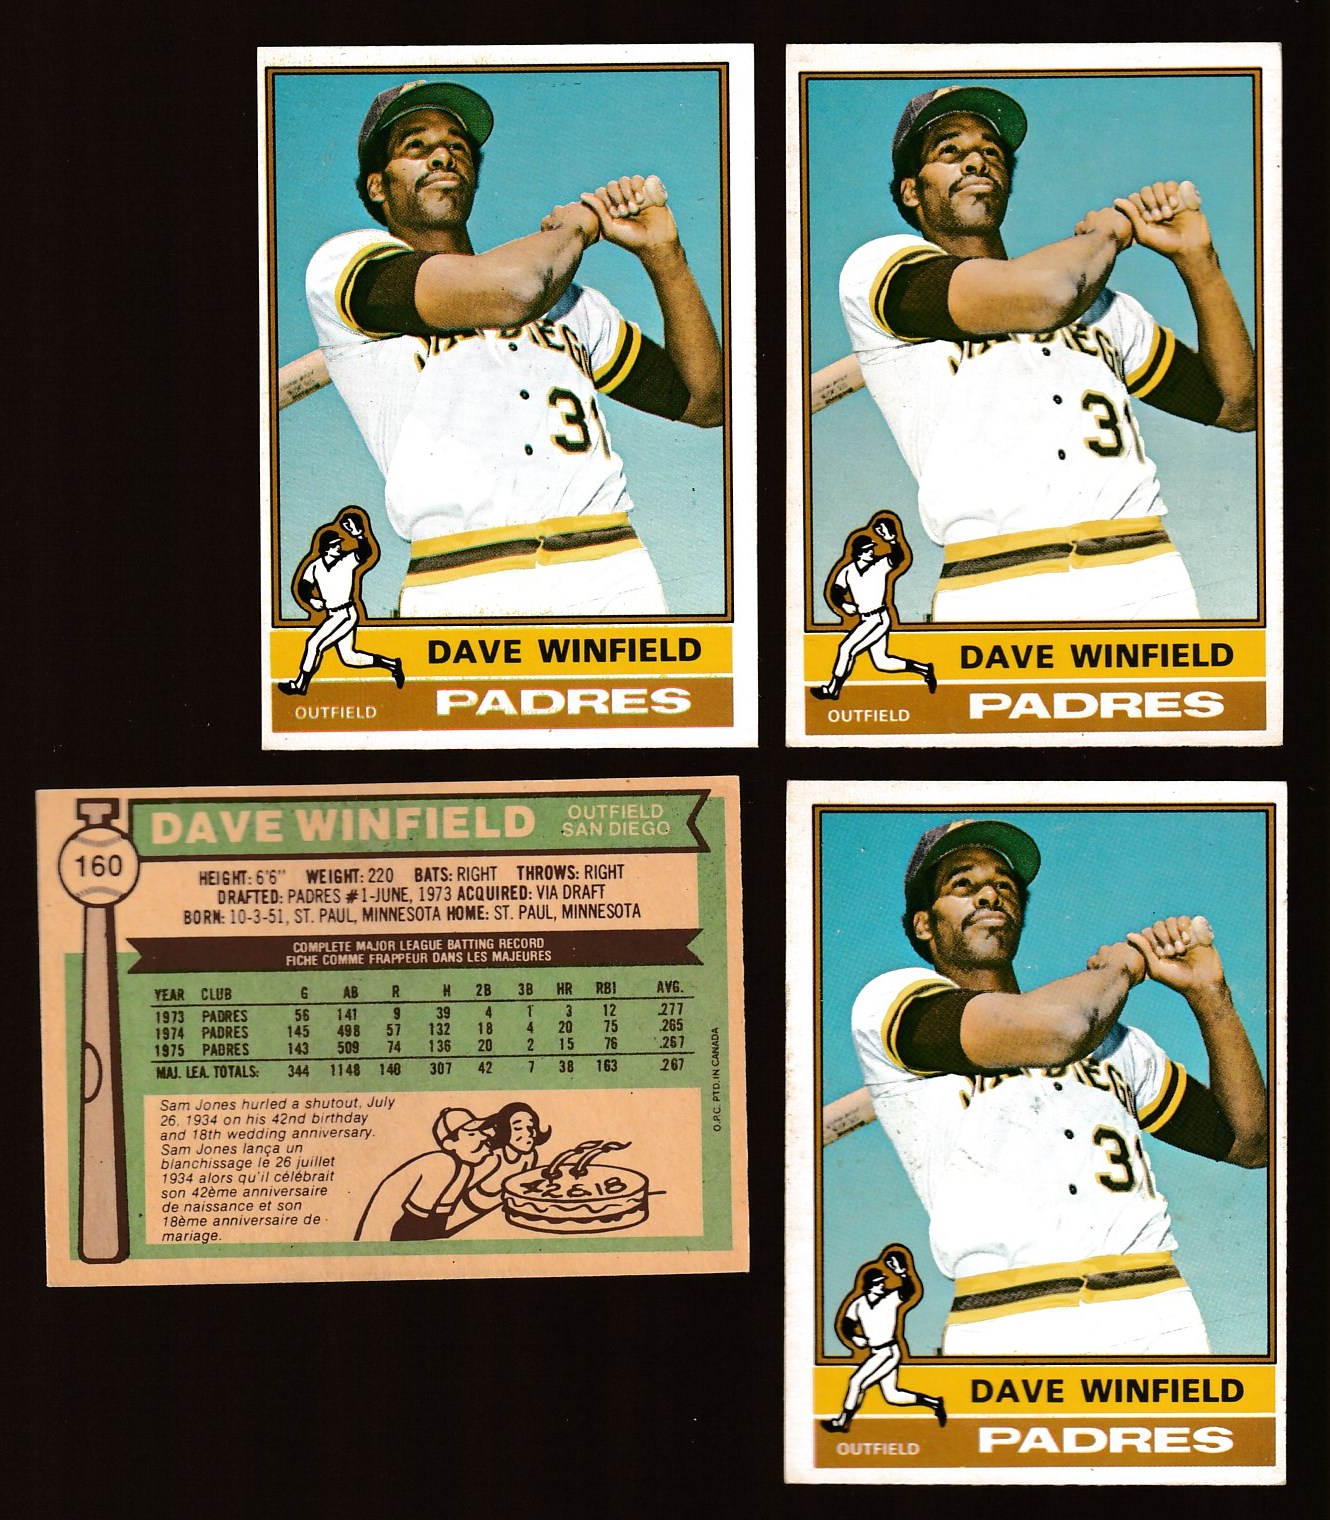 1976 O-Pee-Chee/OPC #160 Dave Winfield (Padres) Baseball cards value